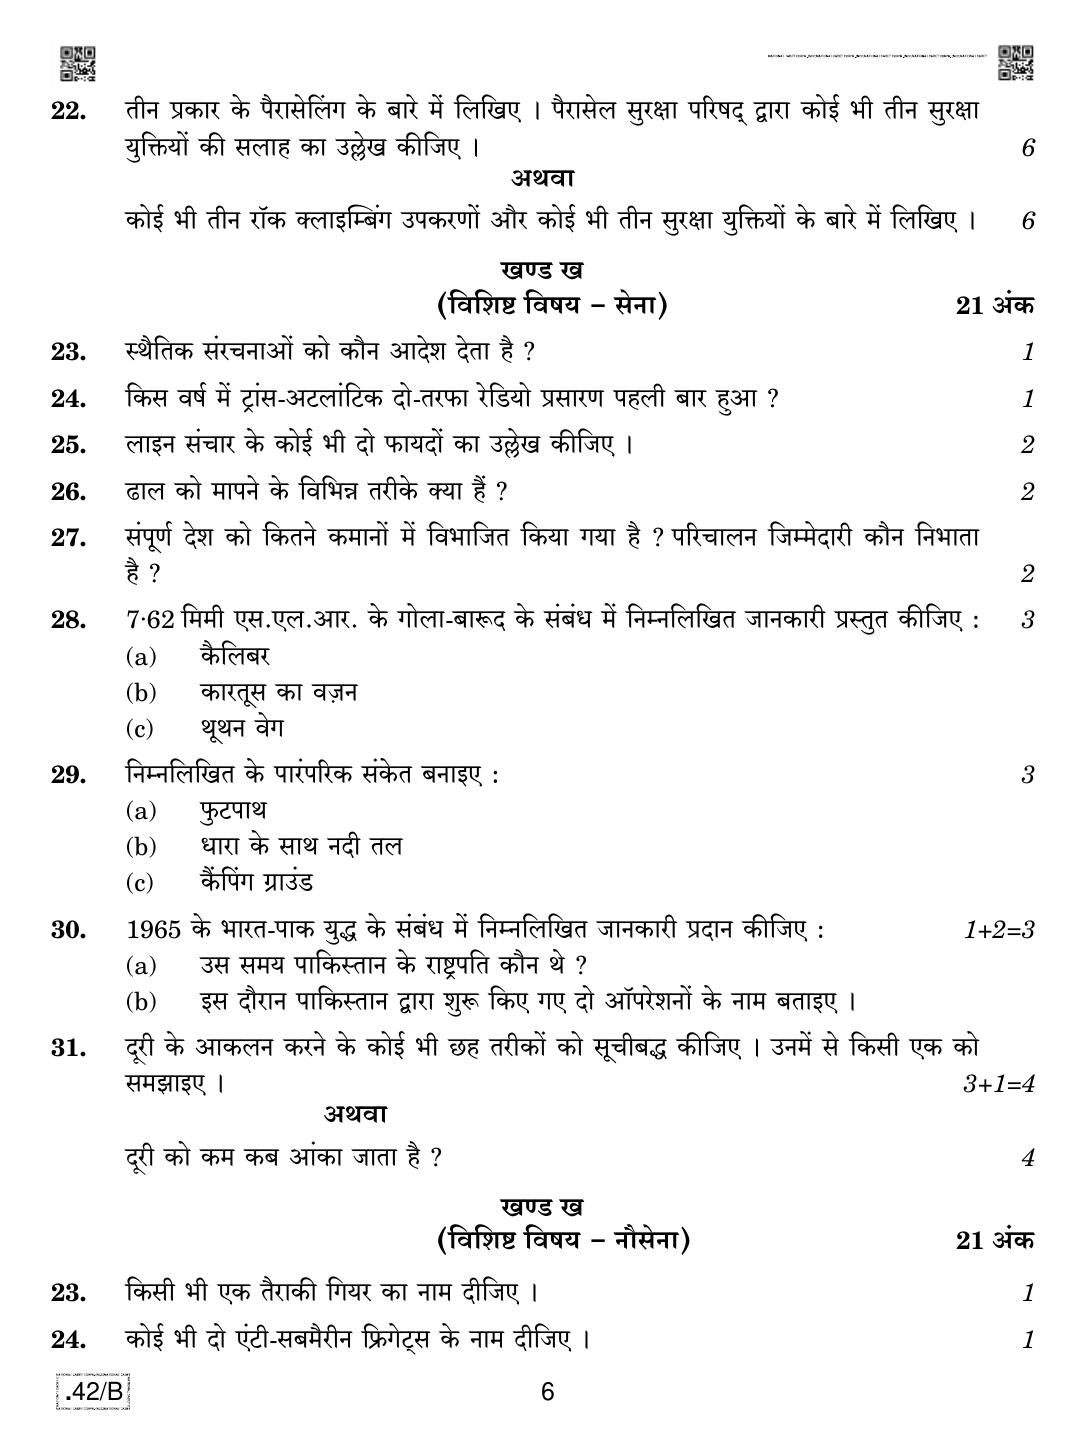 CBSE Class 12 NCC 2020 Compartment Question Paper - Page 6